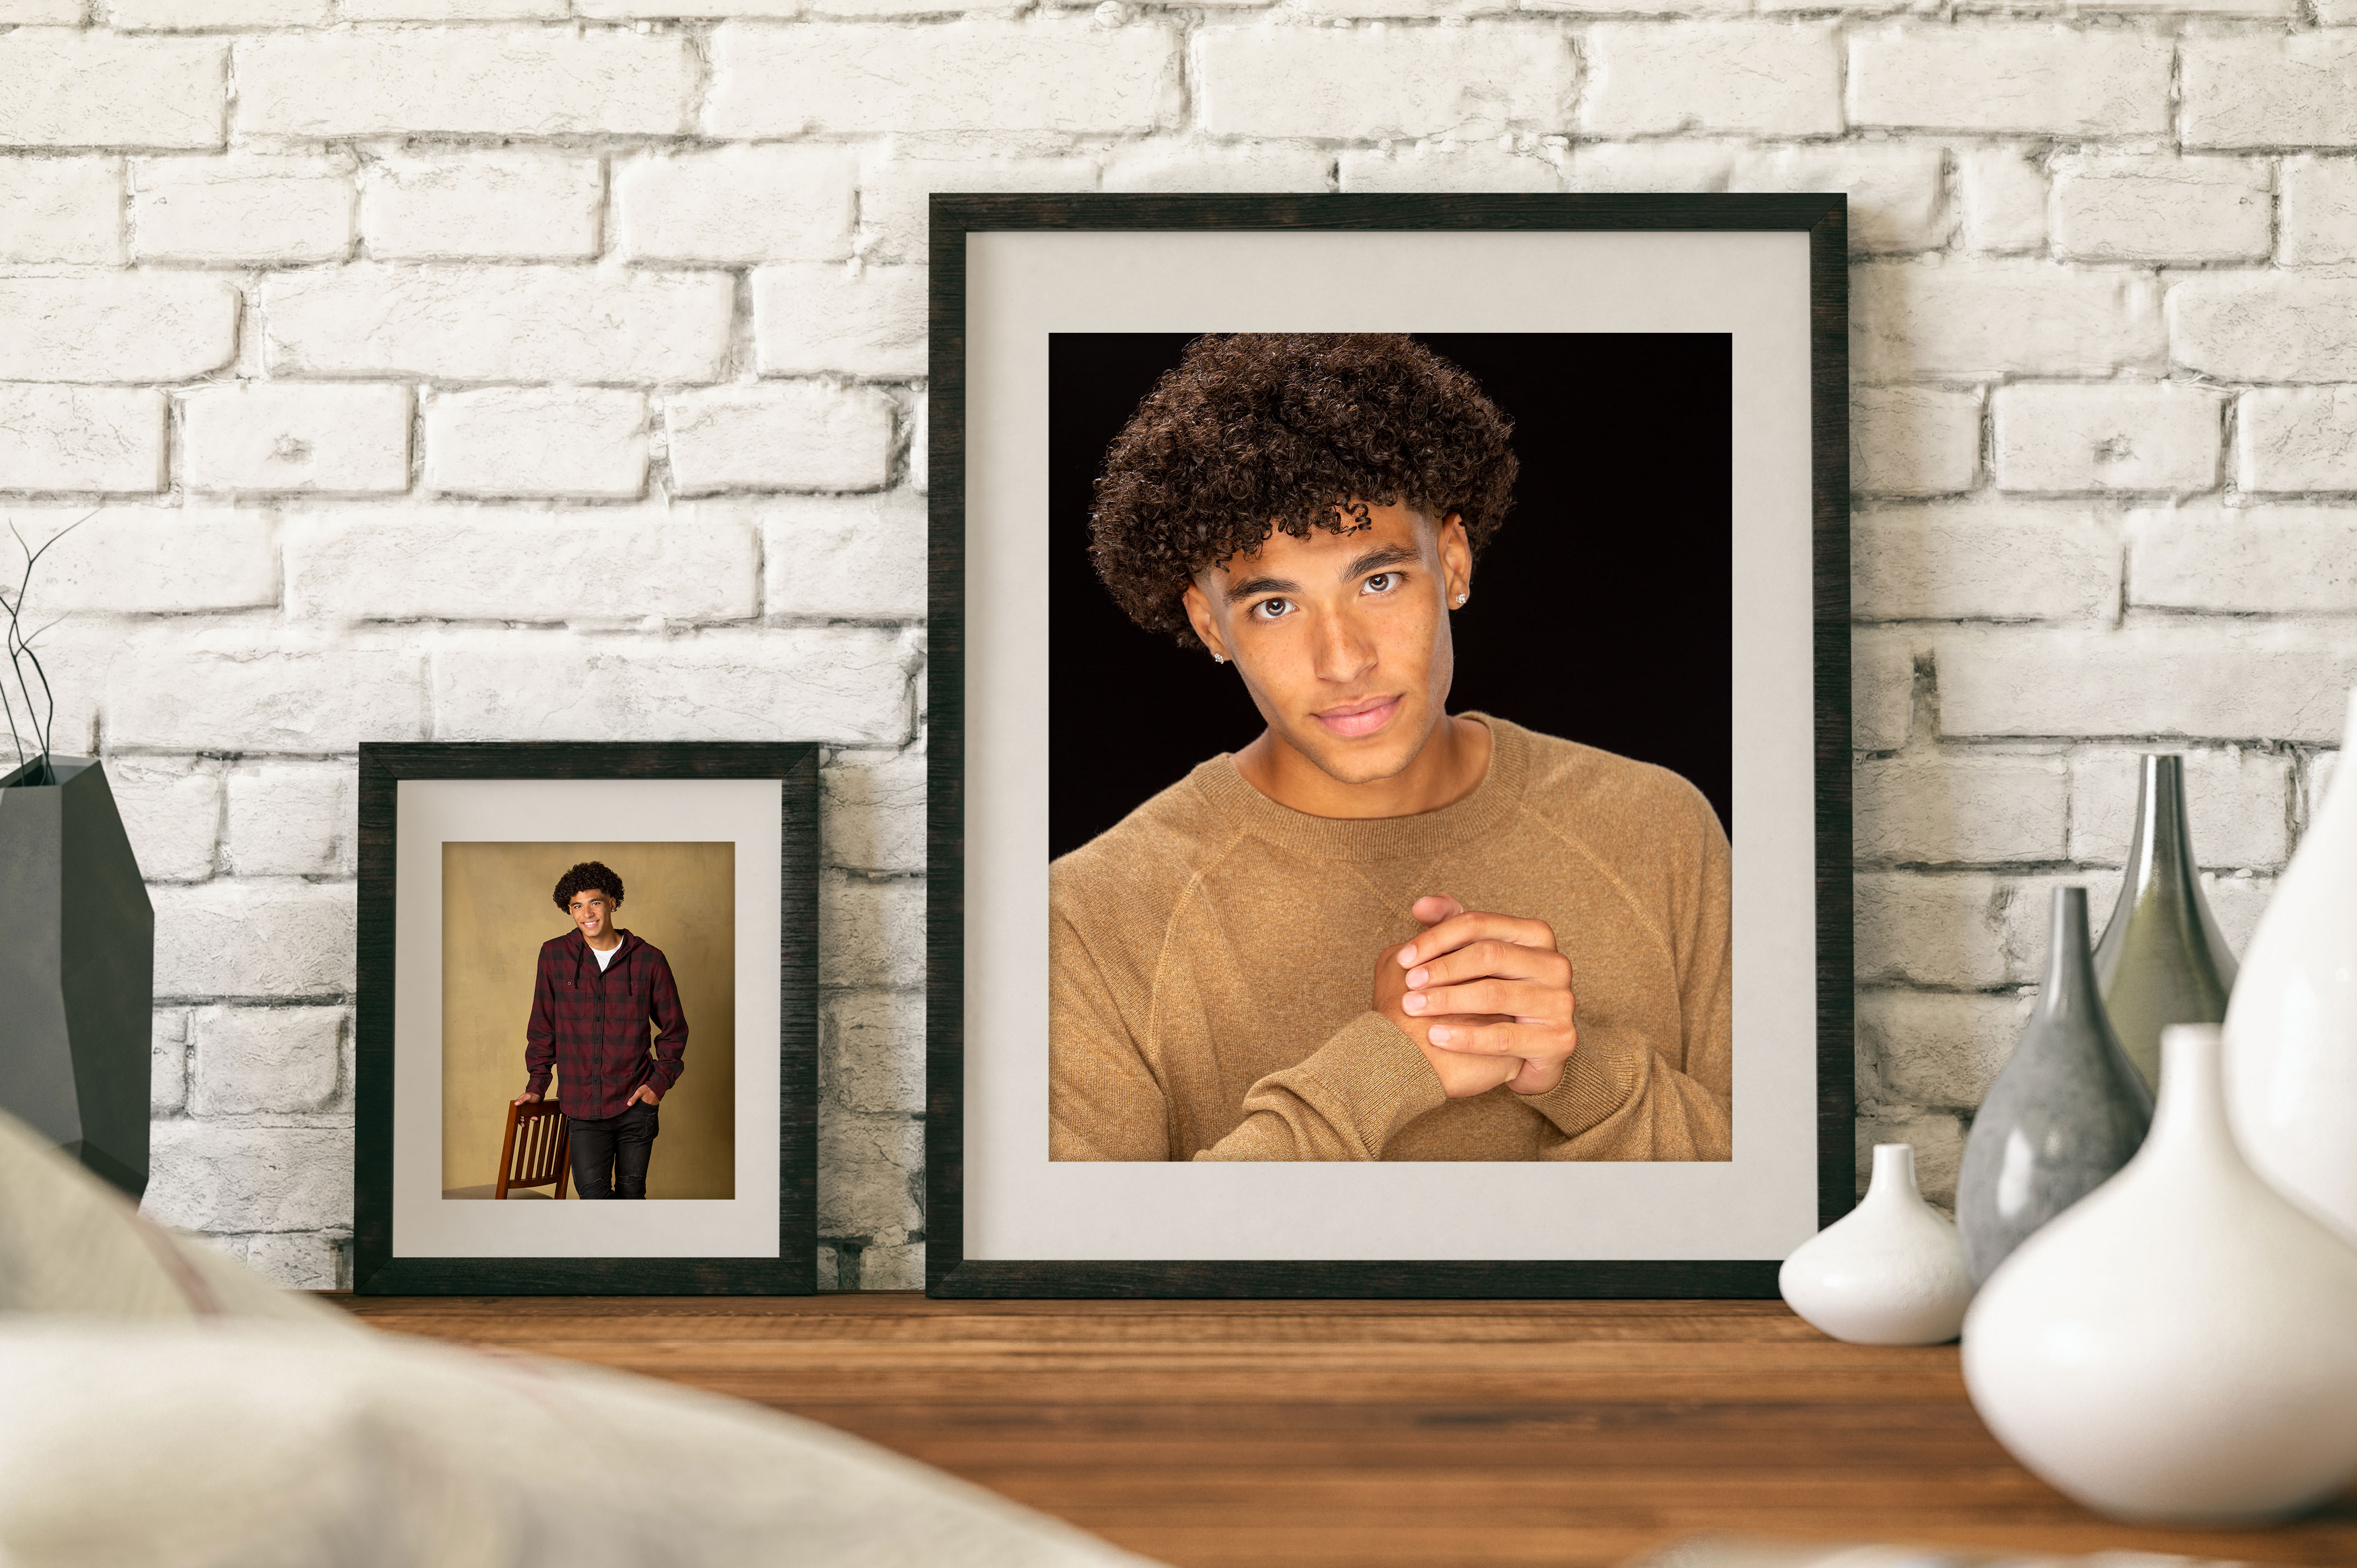 Senior photography displayed on a wooden desk